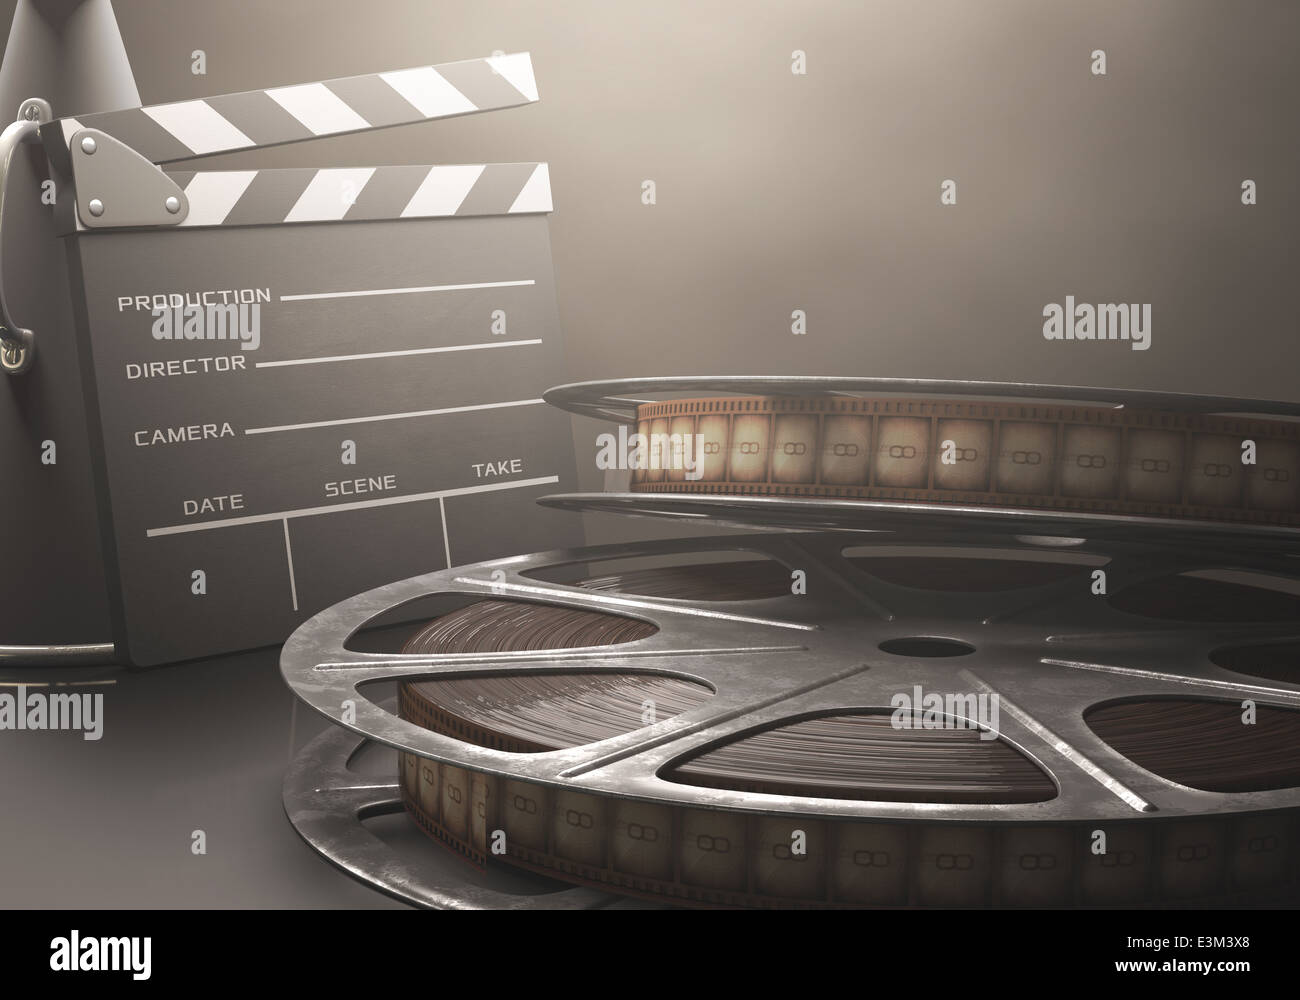 Clapperboard with rolls of film in the retro concept cinema. Stock Photo